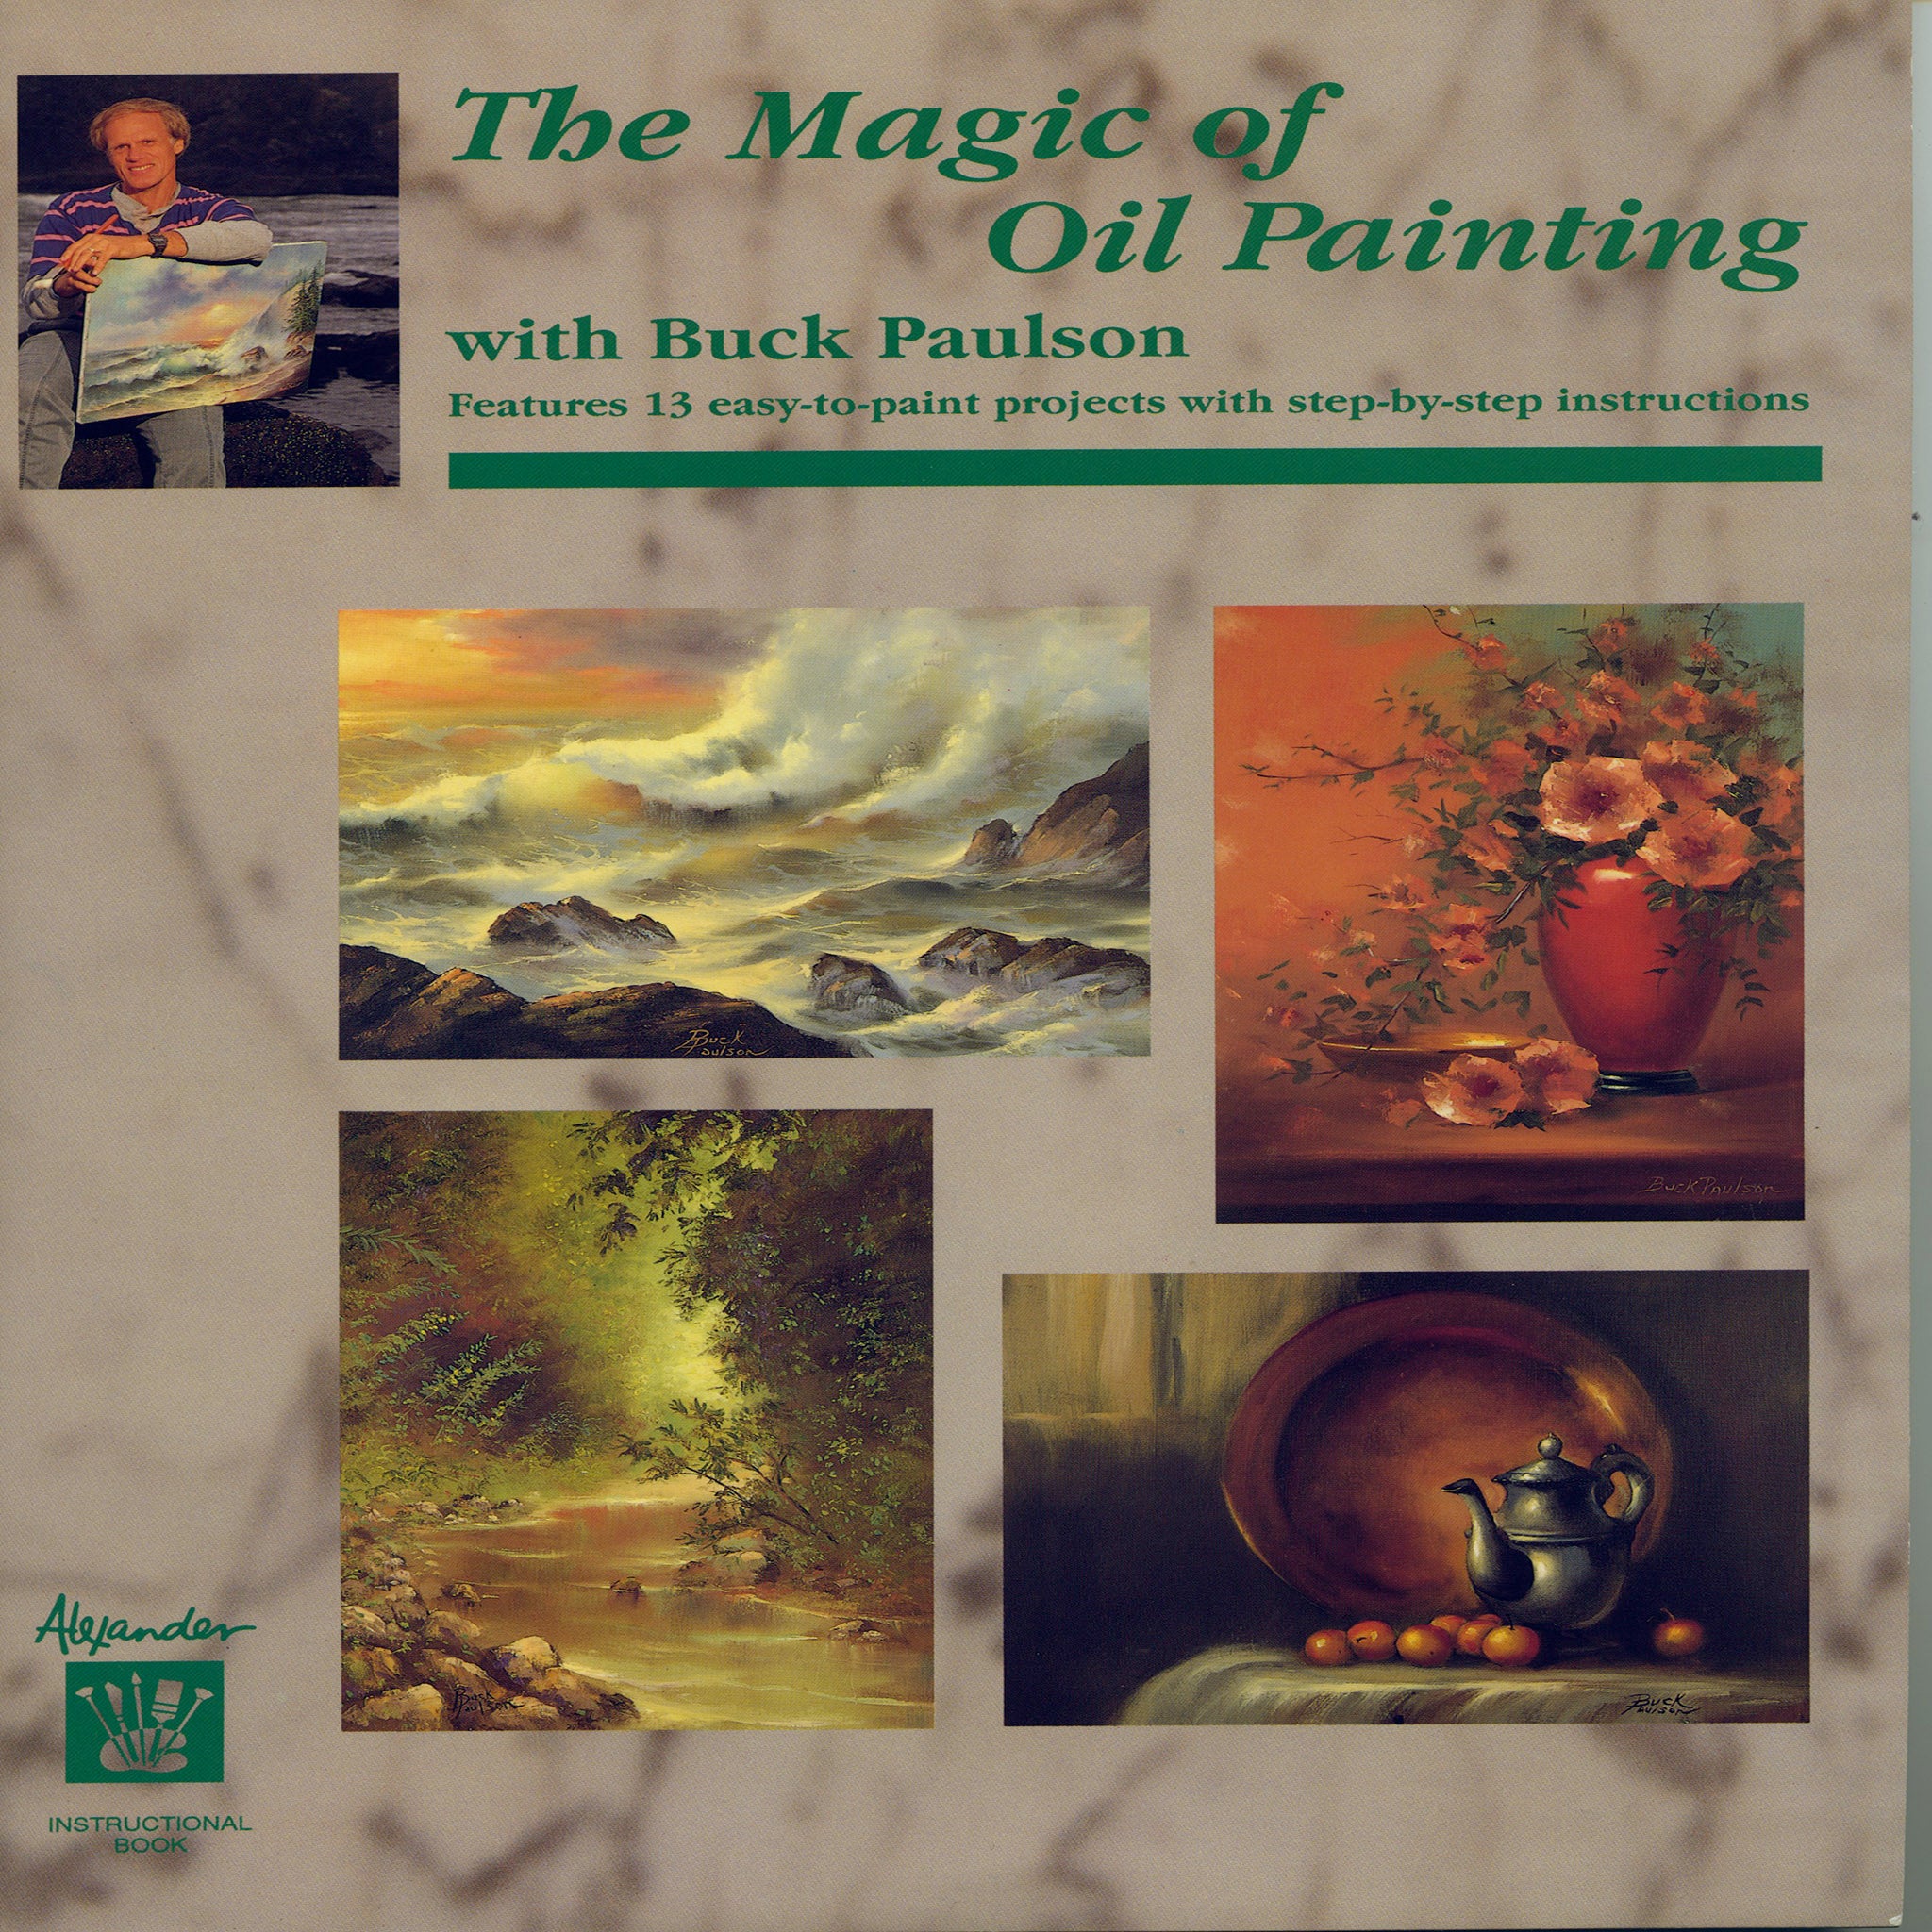 The Magic of Oil Painting with Buck Painting – Alexander Art Store